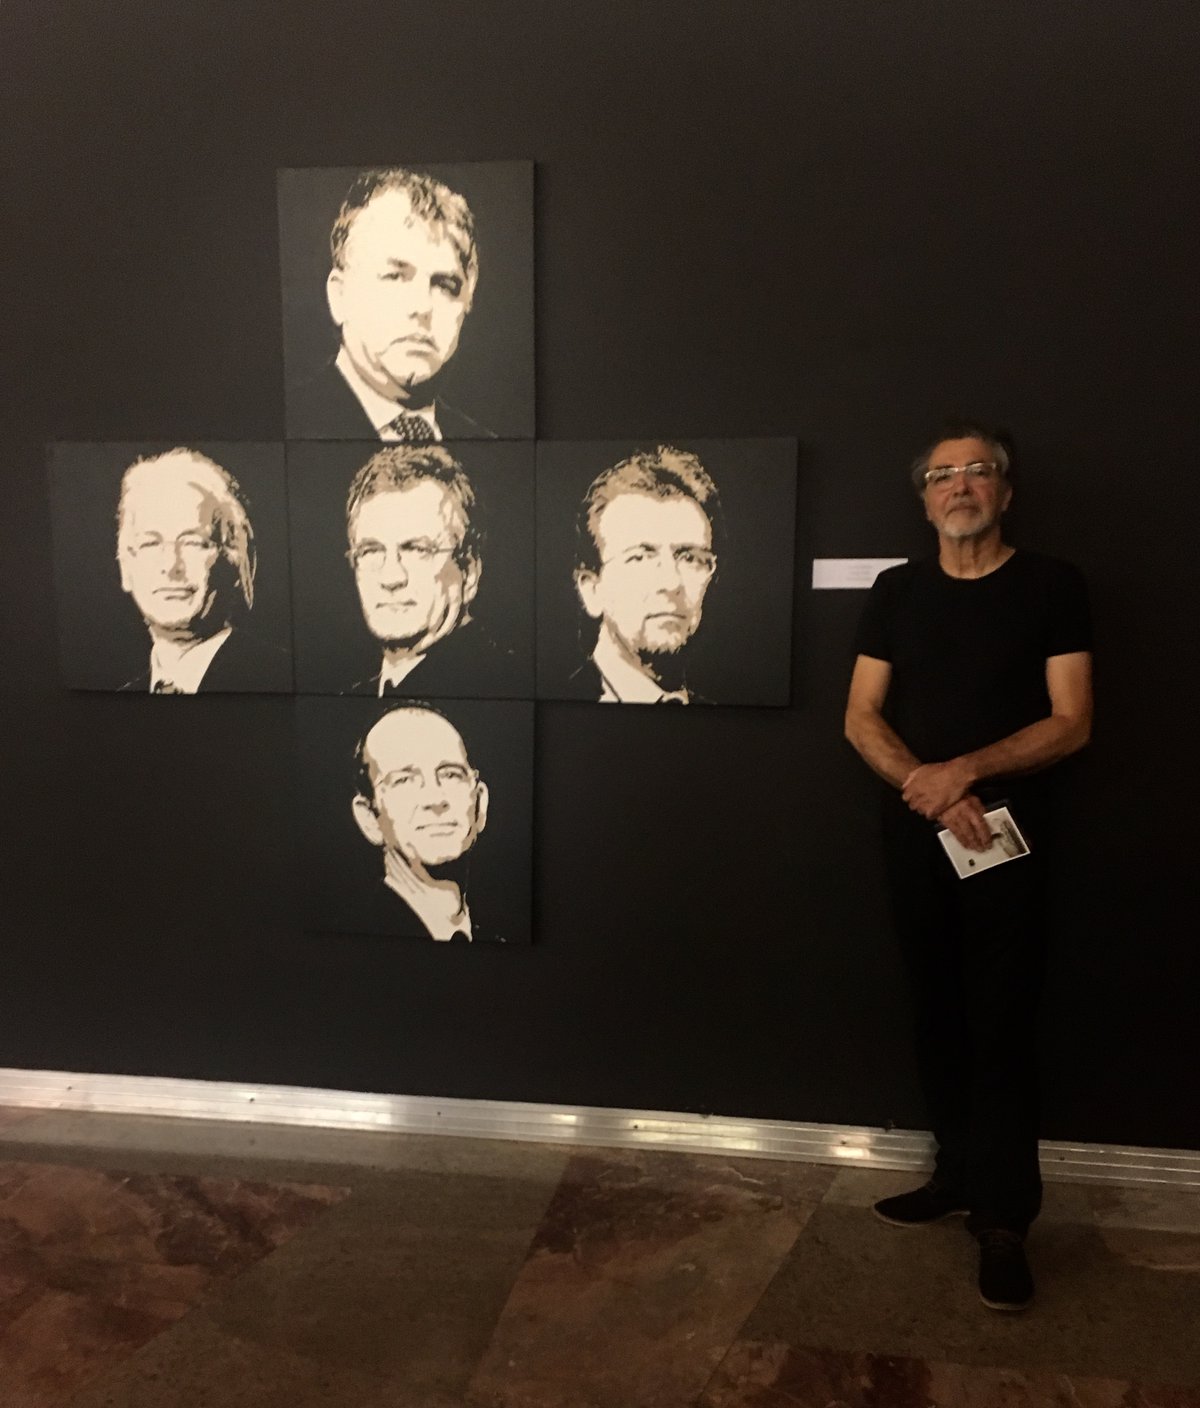 Matjaž Stopar (Slovenia) in front of his painting of the IRWIN group members' portrait.